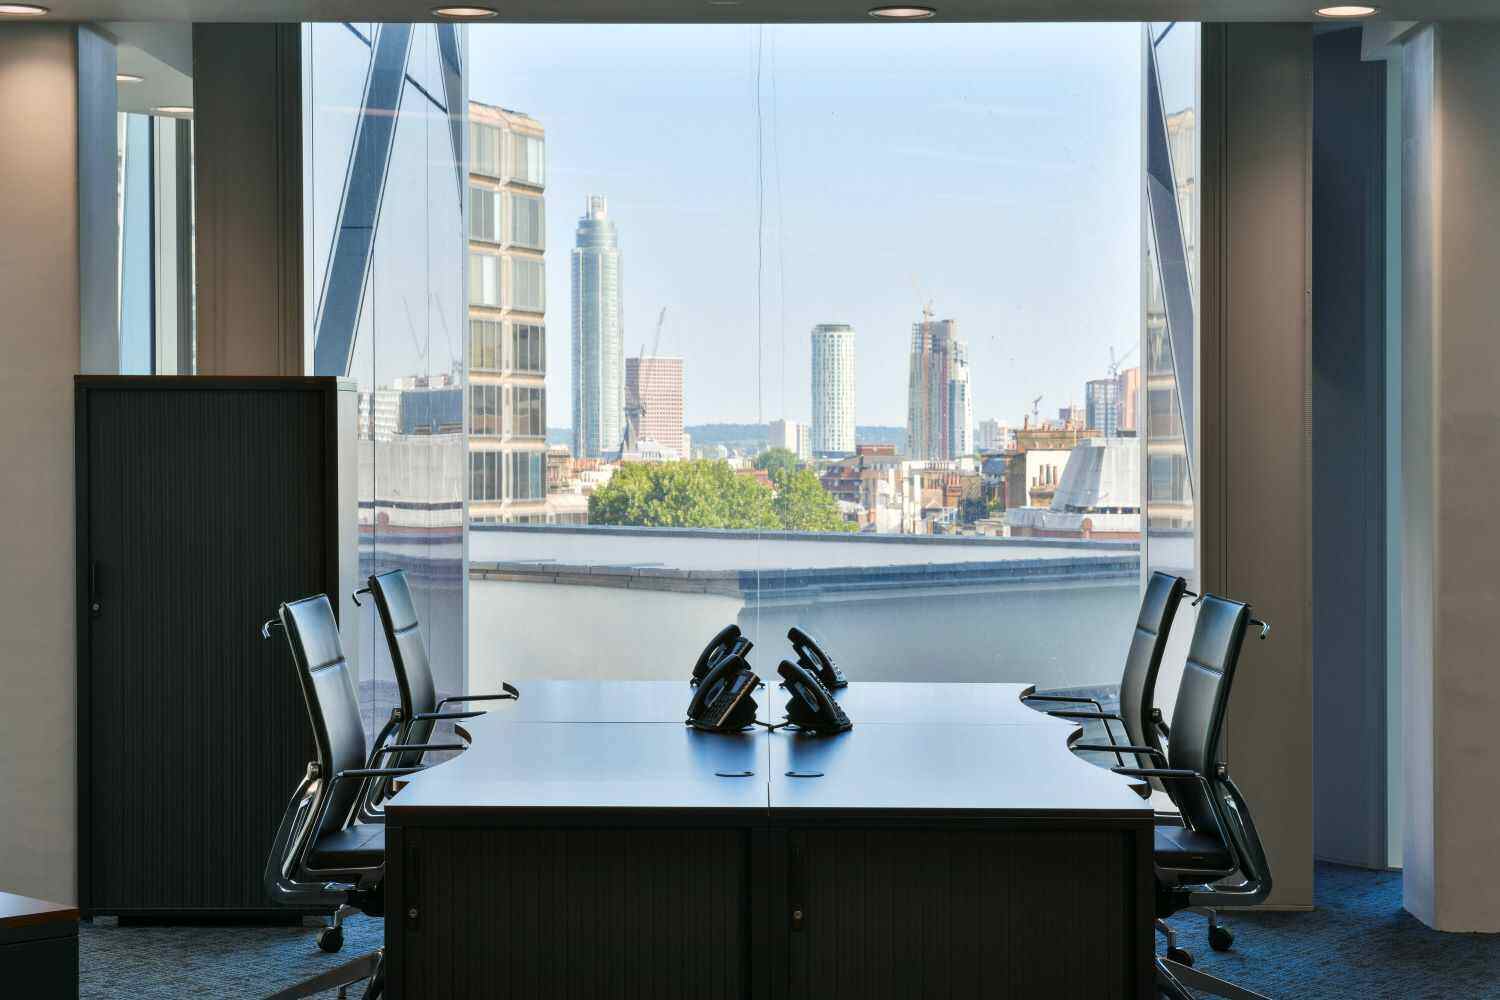 Offices at Bressenden Place London